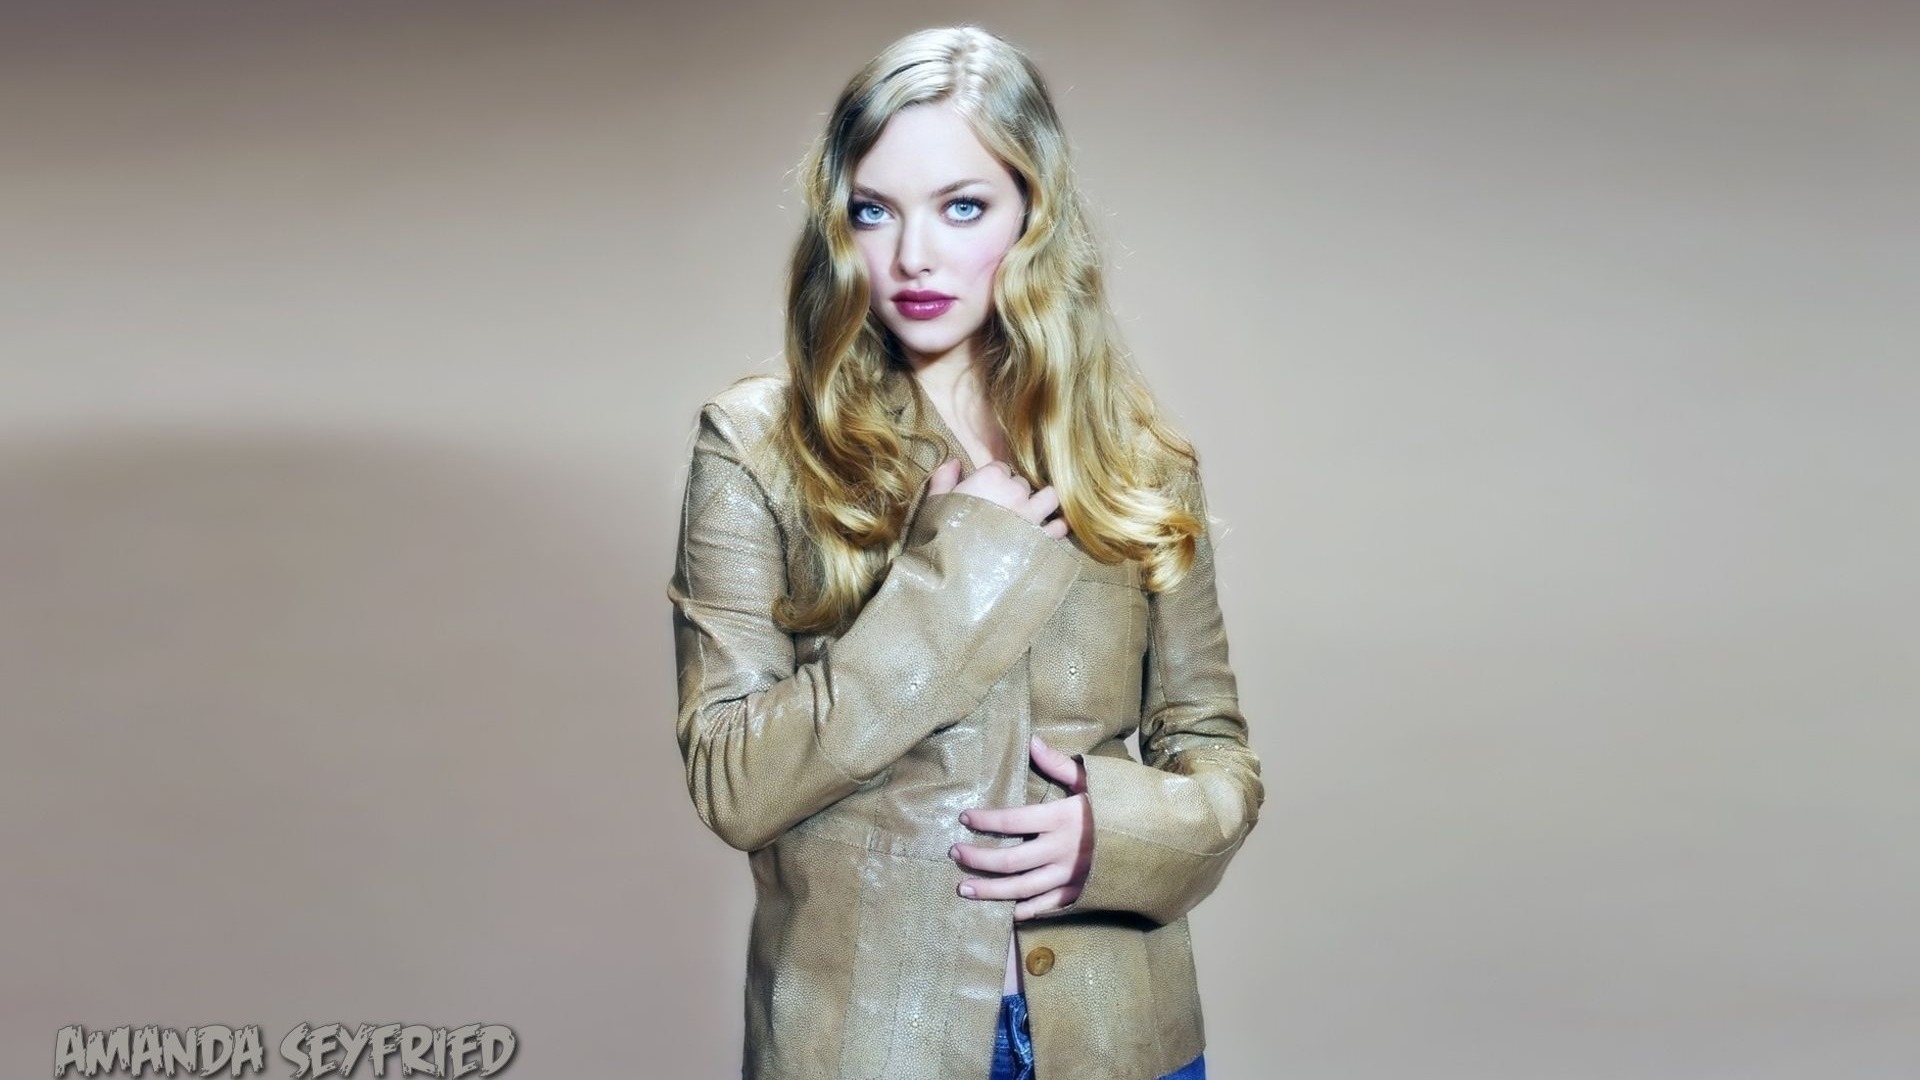 Amanda Seyfried #006 - 1920x1080 Wallpapers Pictures Photos Images